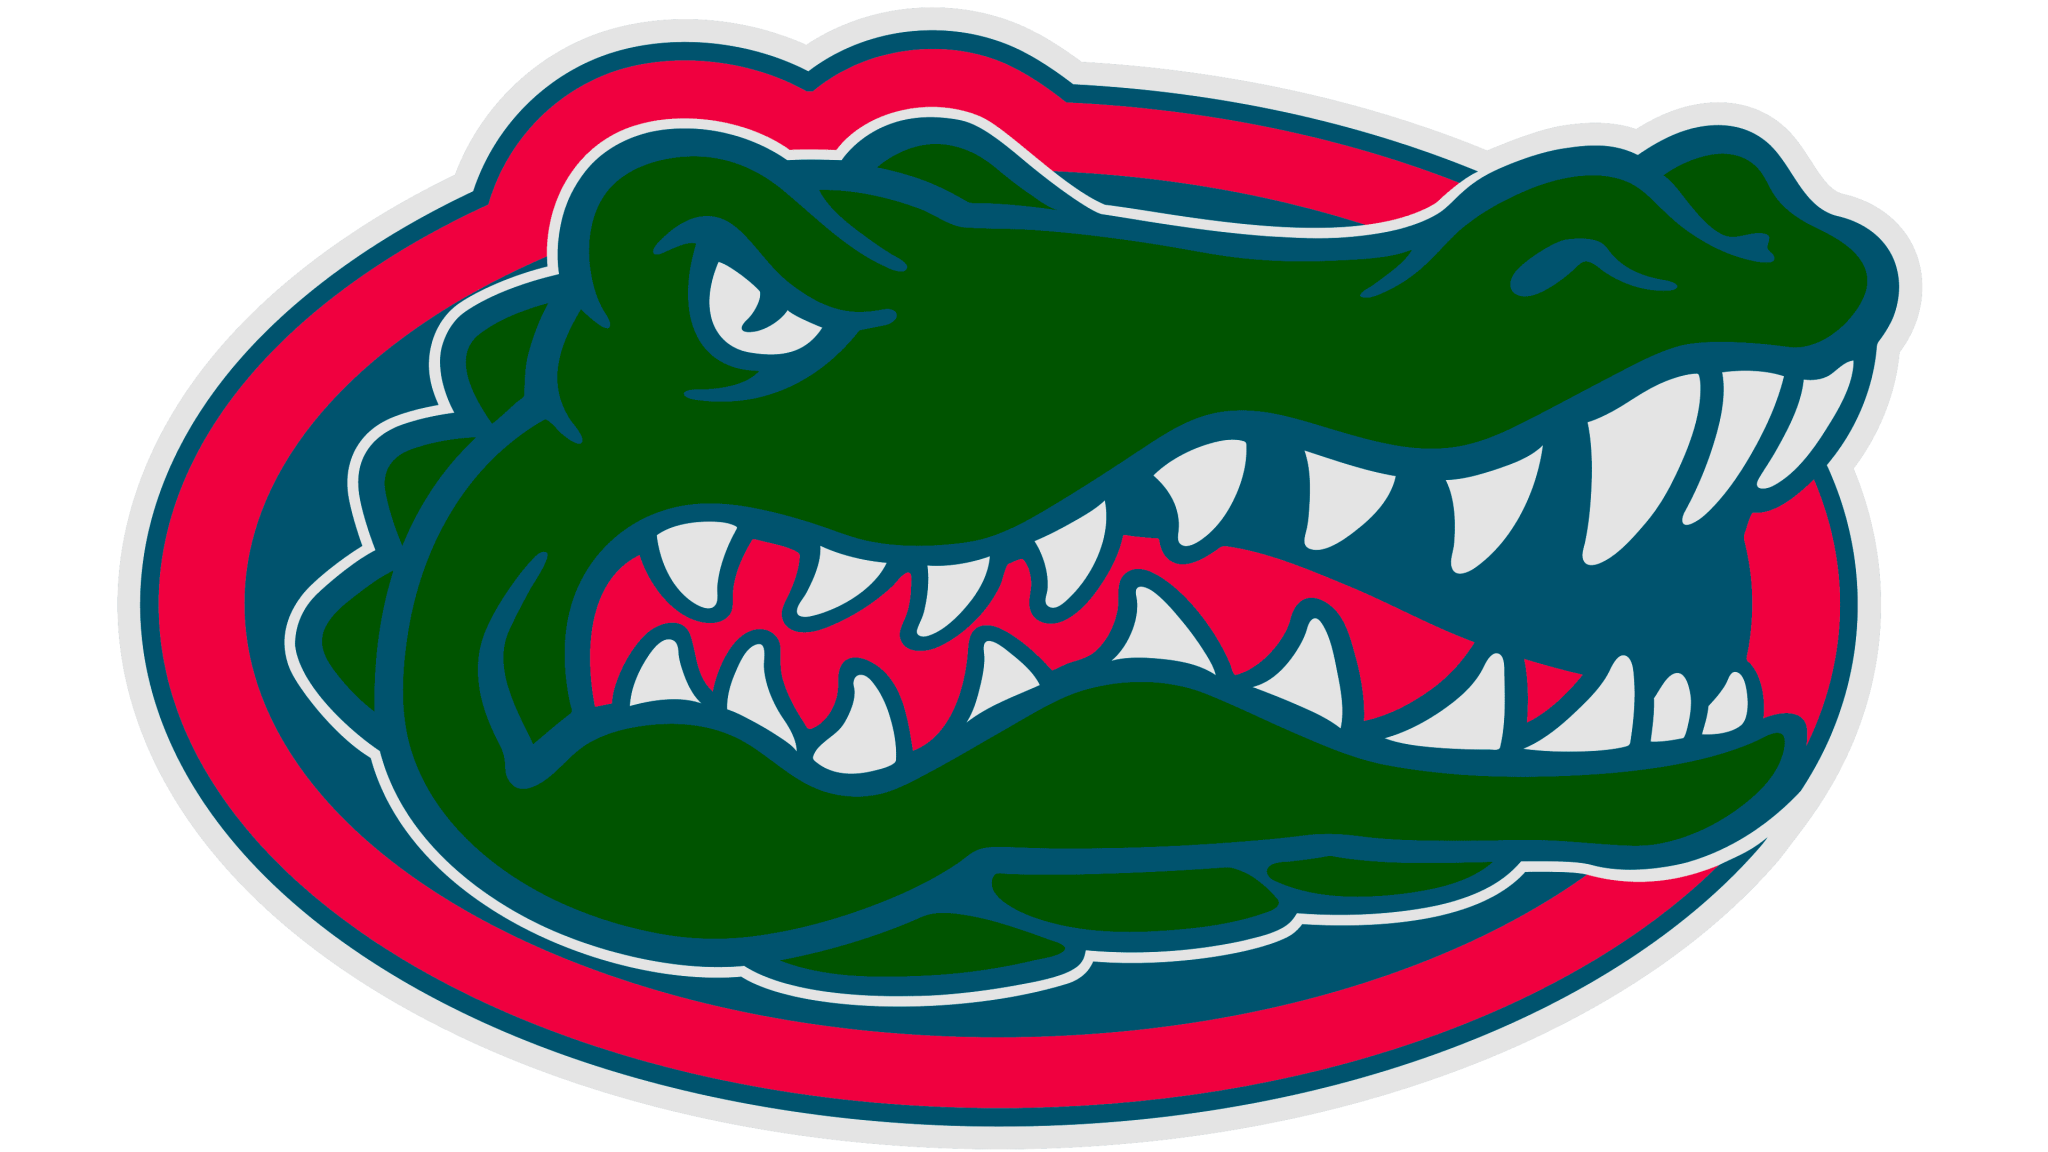 Florida Gators Logo and symbol, meaning, history, PNG, brand